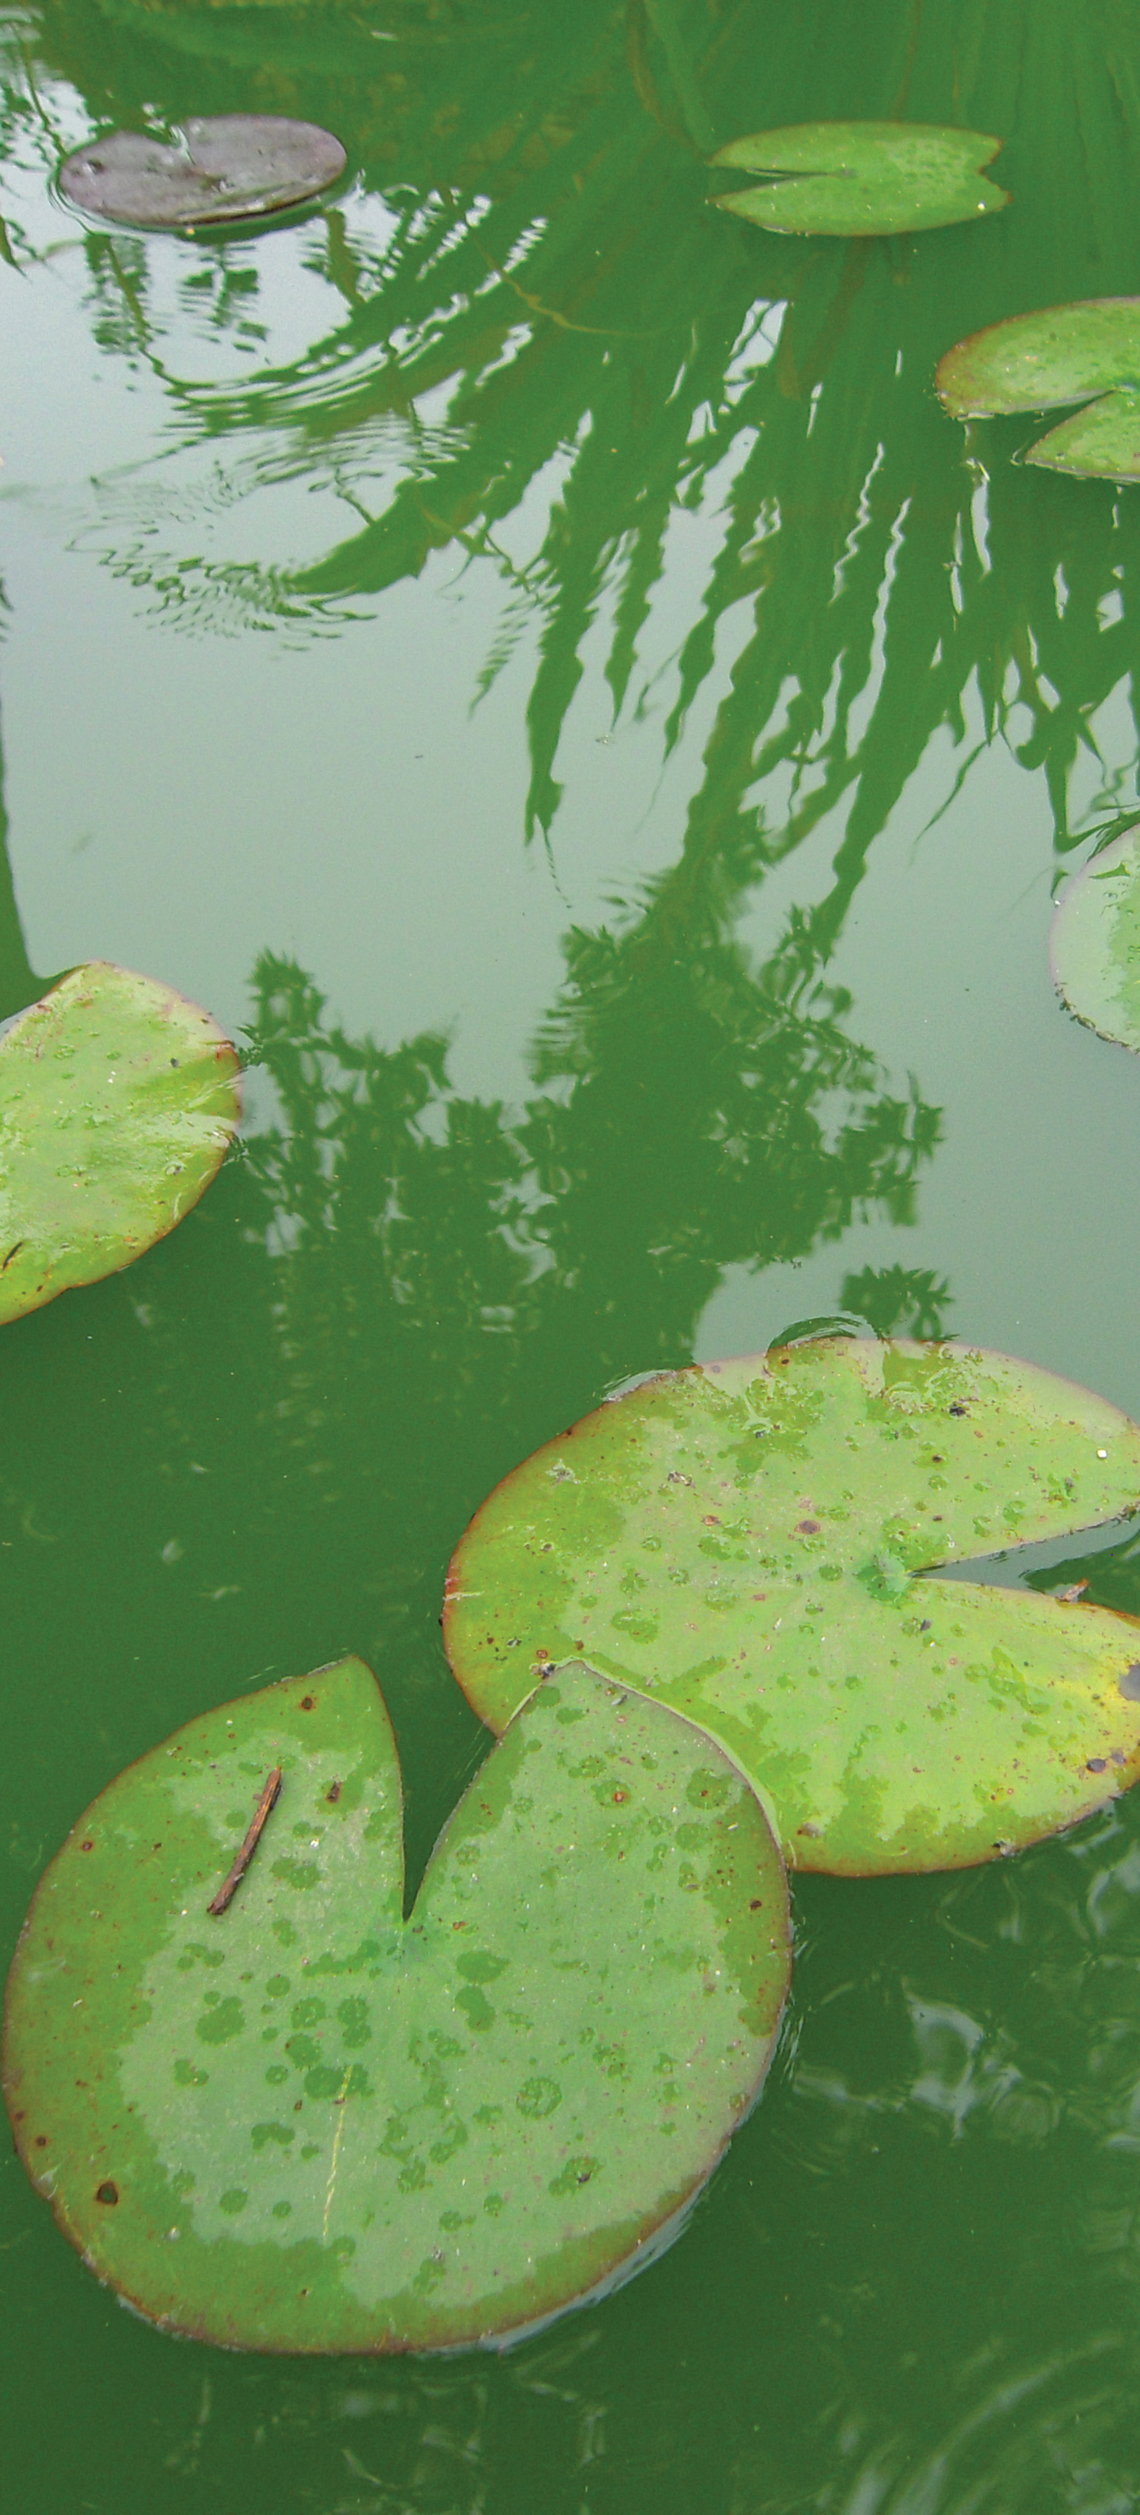 Luminous green water covered in lily pads